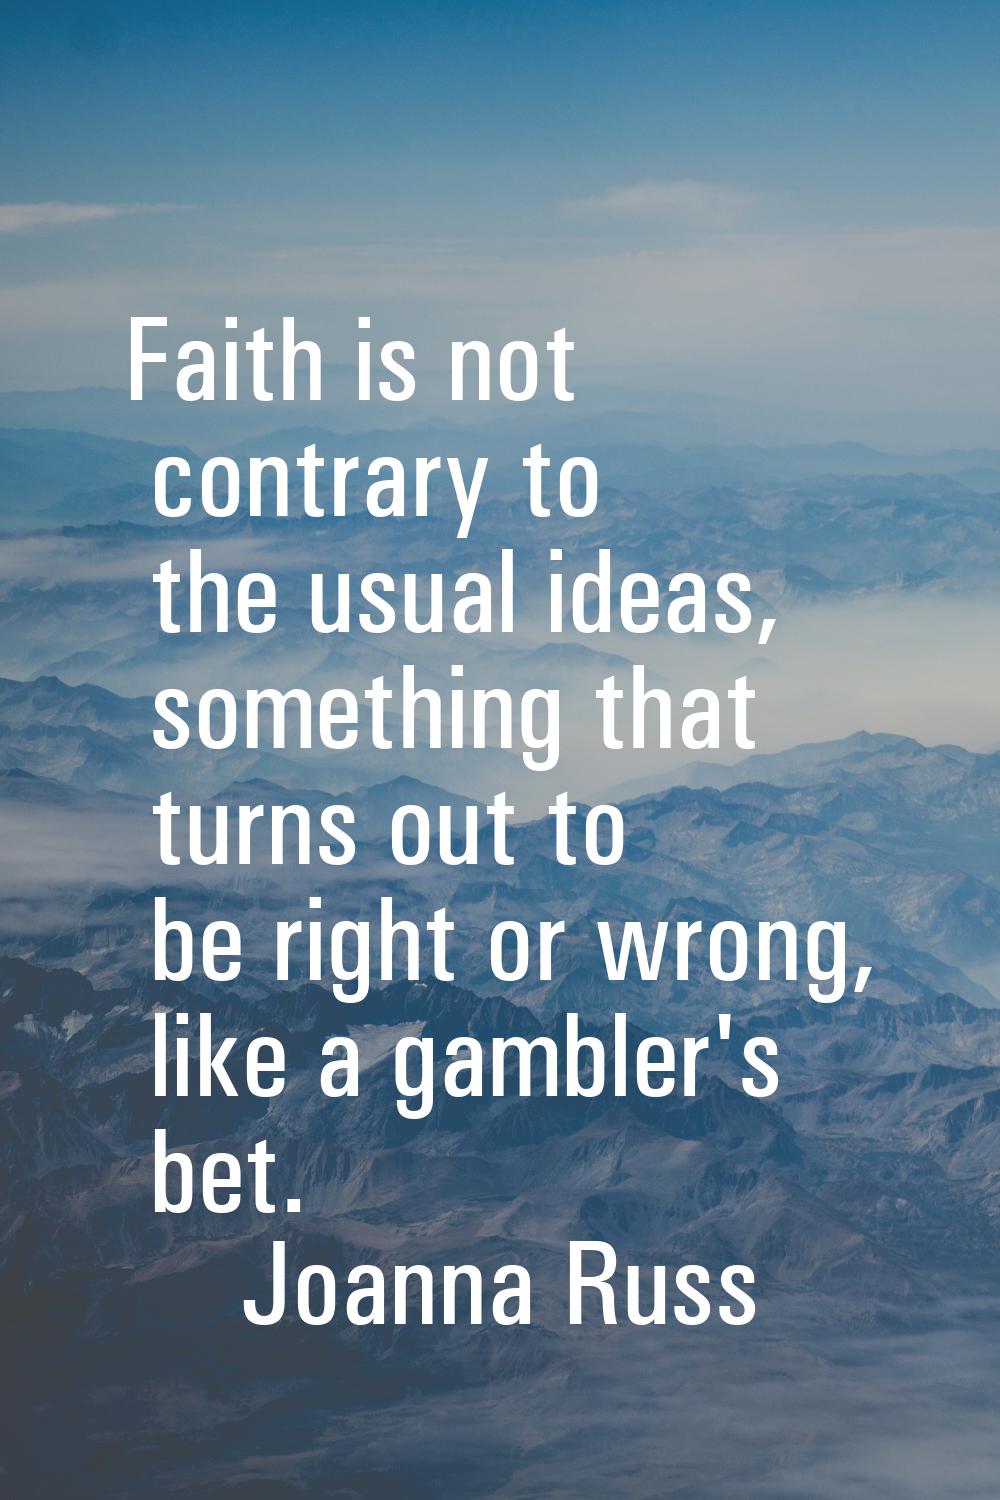 Faith is not contrary to the usual ideas, something that turns out to be right or wrong, like a gam